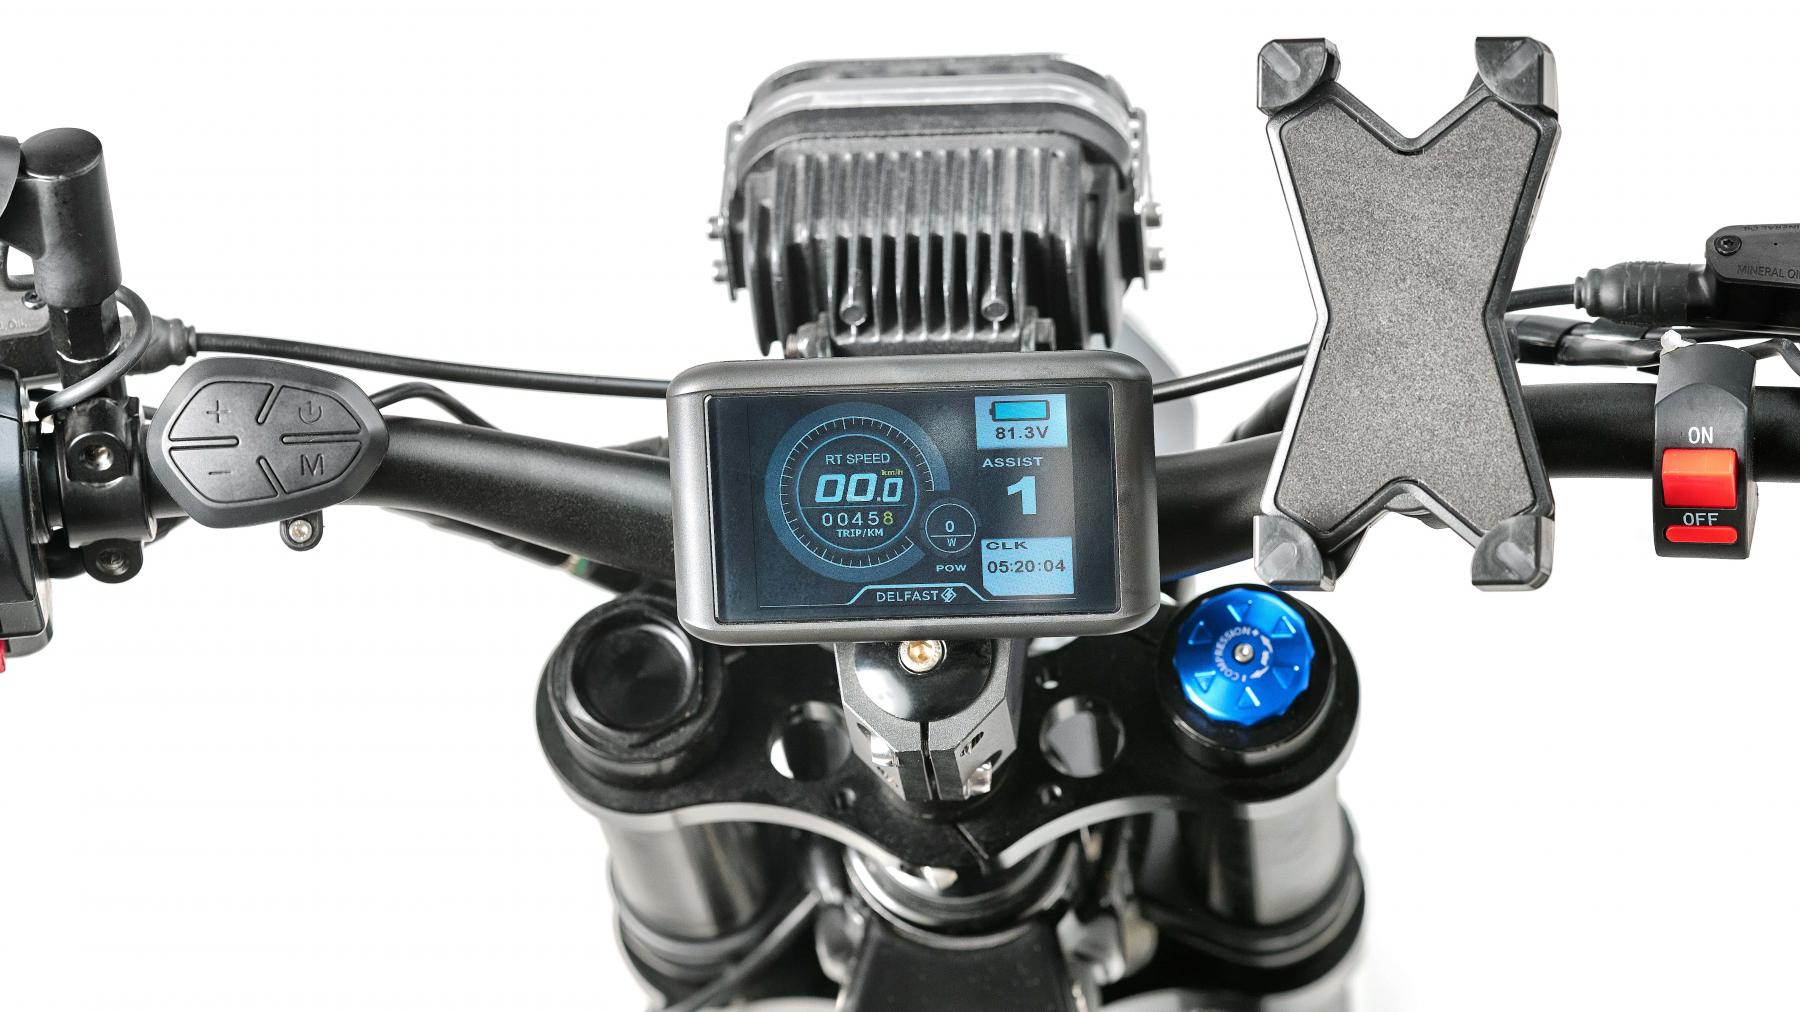 Delfast Top 3.0 ebike has a big 10 inch display with all the info you need to know about your ride, namely: Speed, Mode, Battery status, Odometer.